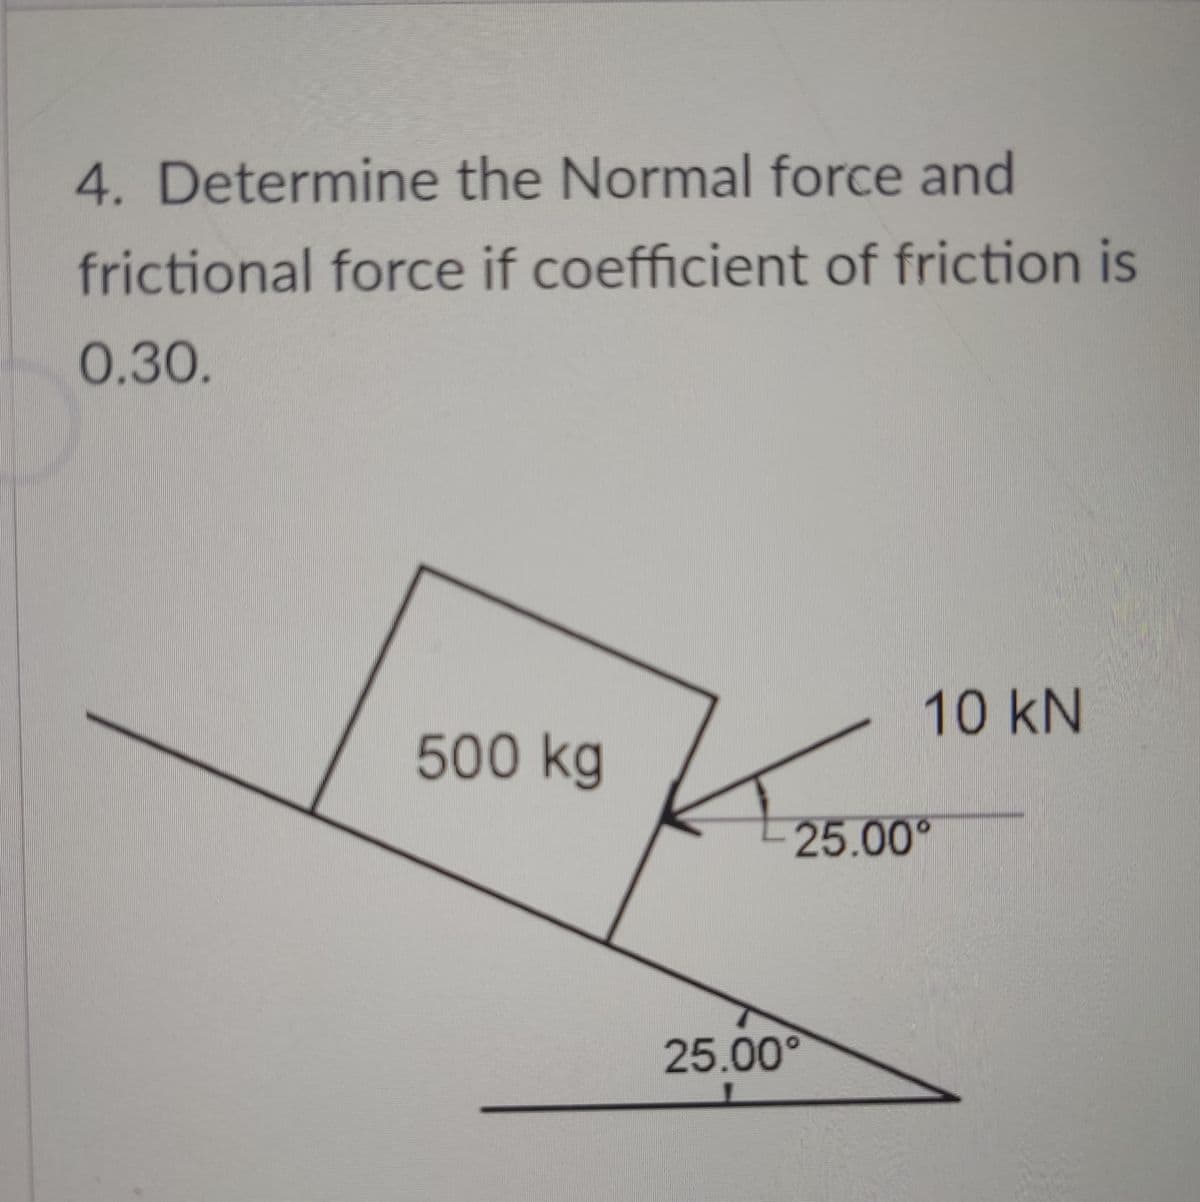 4. Determine the Normal force and
frictional force if coefficient of friction is
0.30.
10KN
500kg
-25.00°
25.00°
